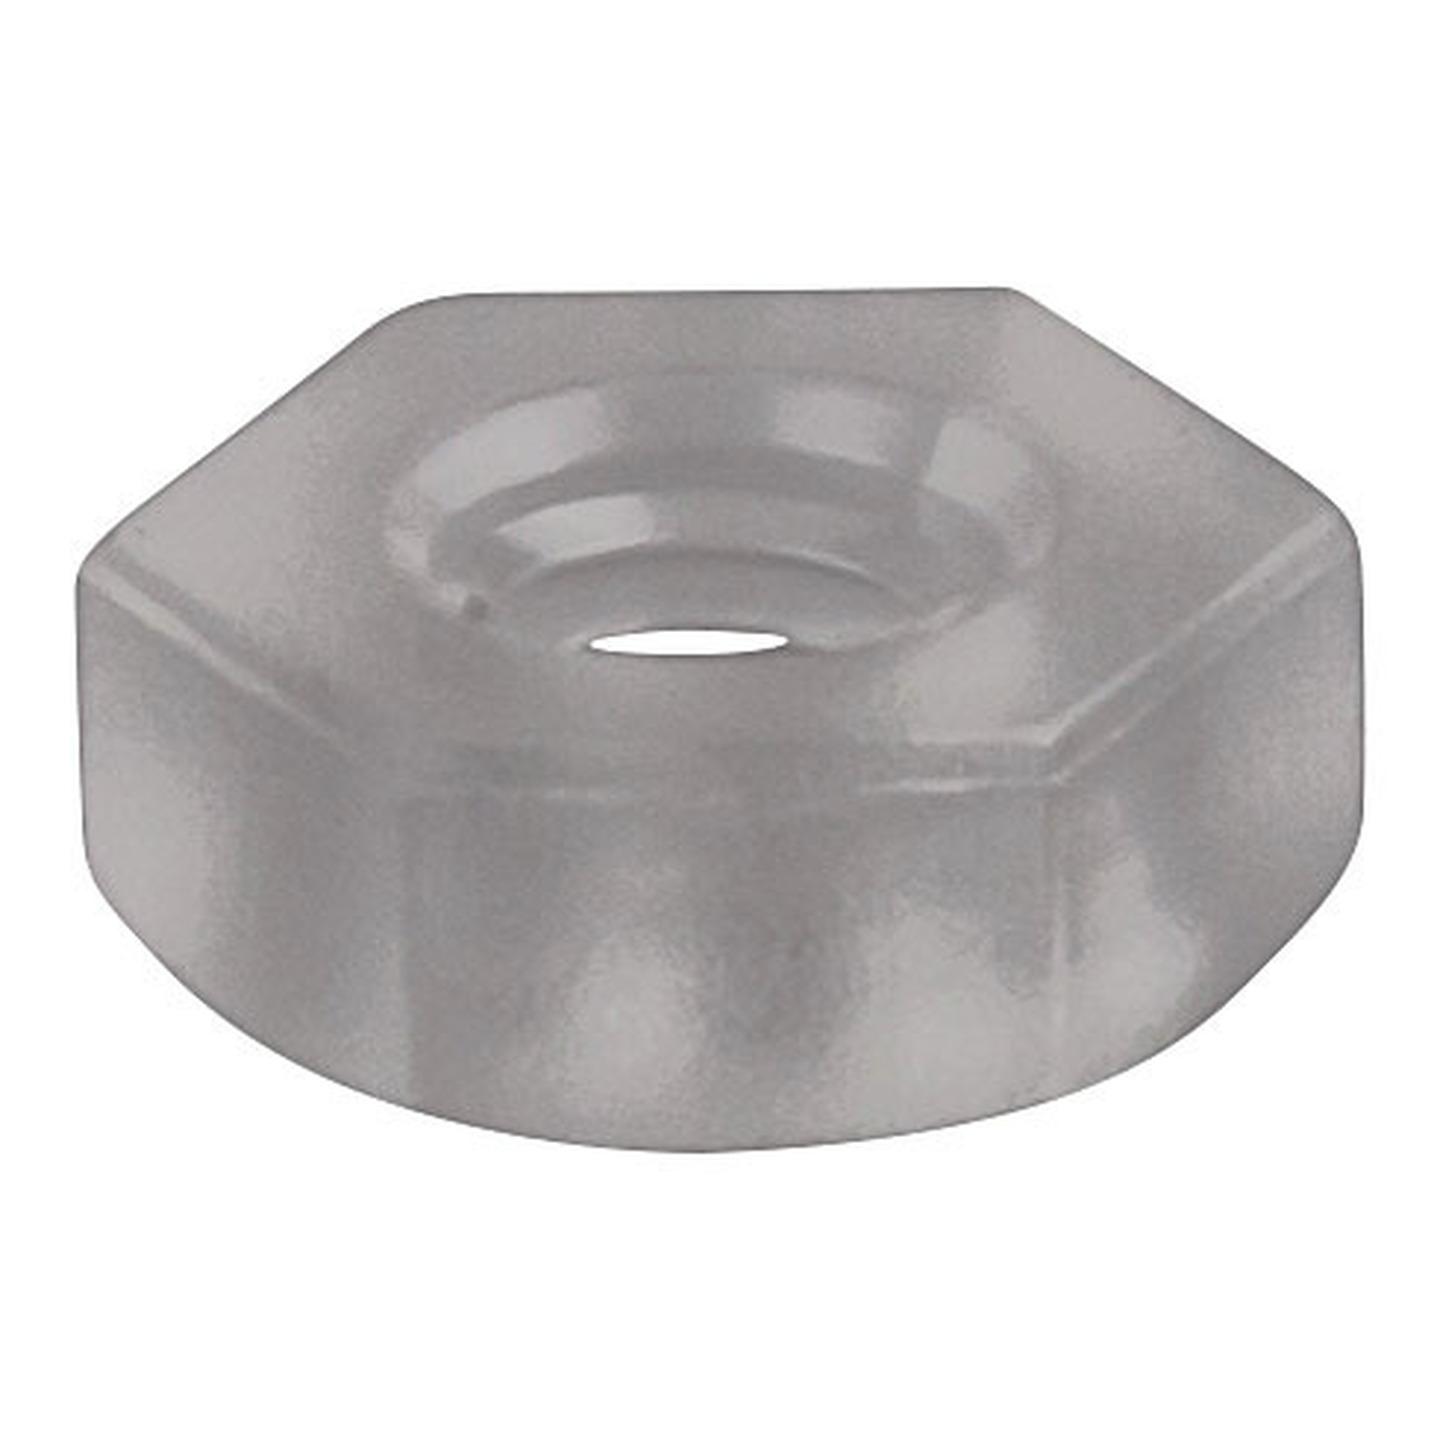 4mm Nylon Nuts - Pack of 25